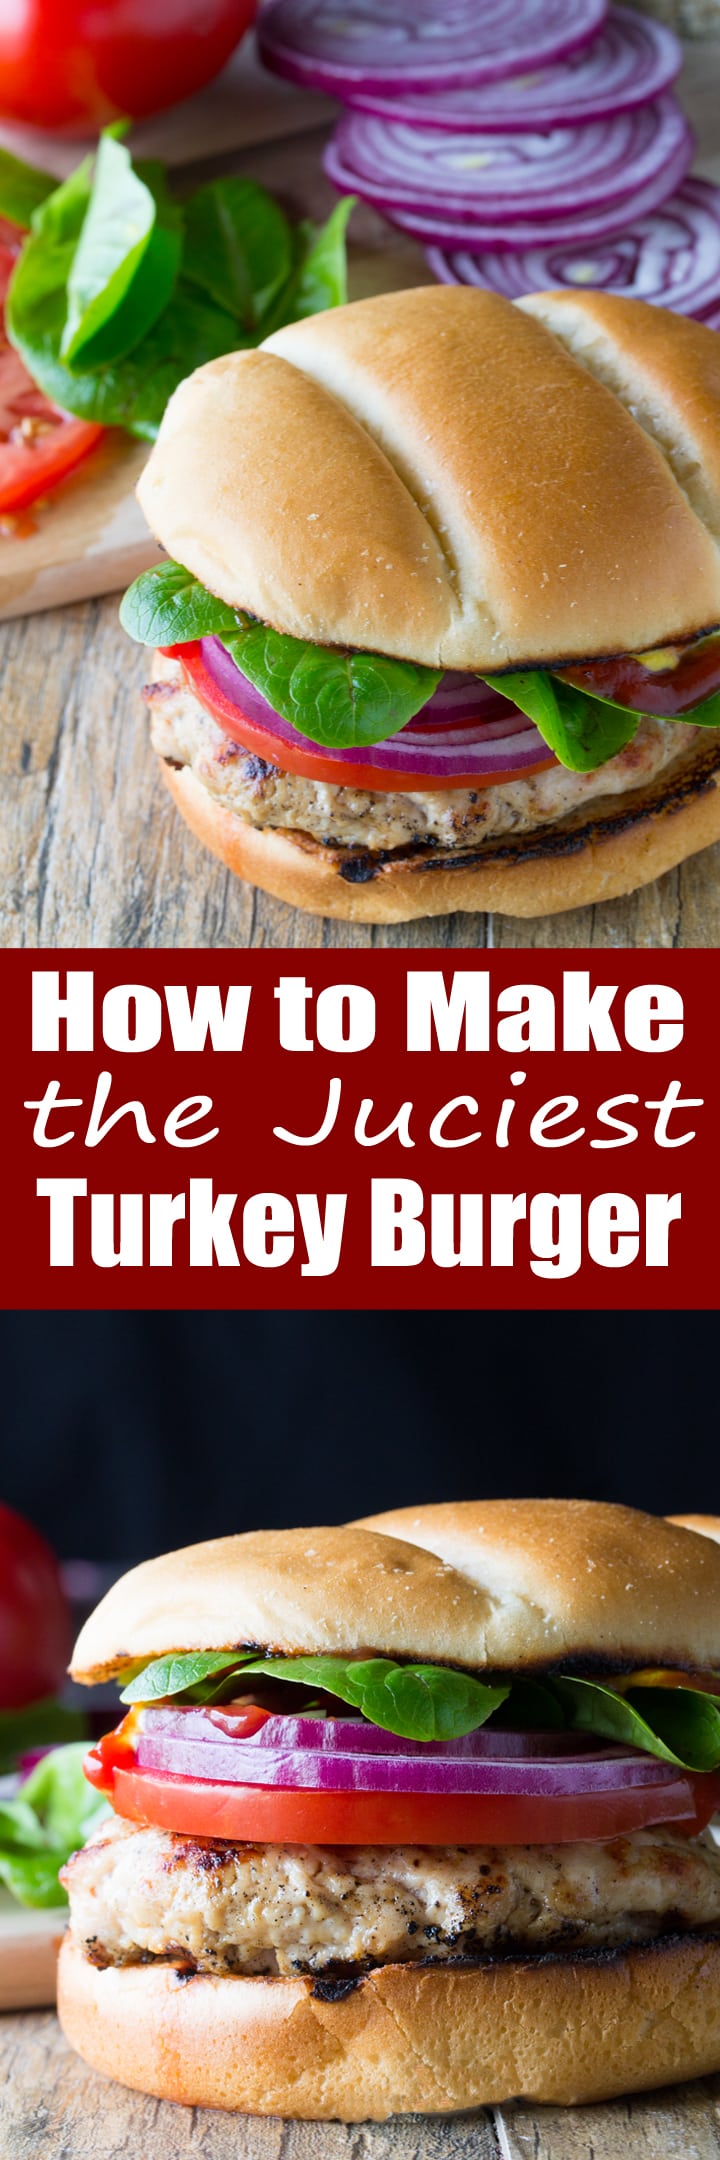 Making a juicy turkey burger is easy. It just takes a few secrets to get the perfect juicy turkey burger.